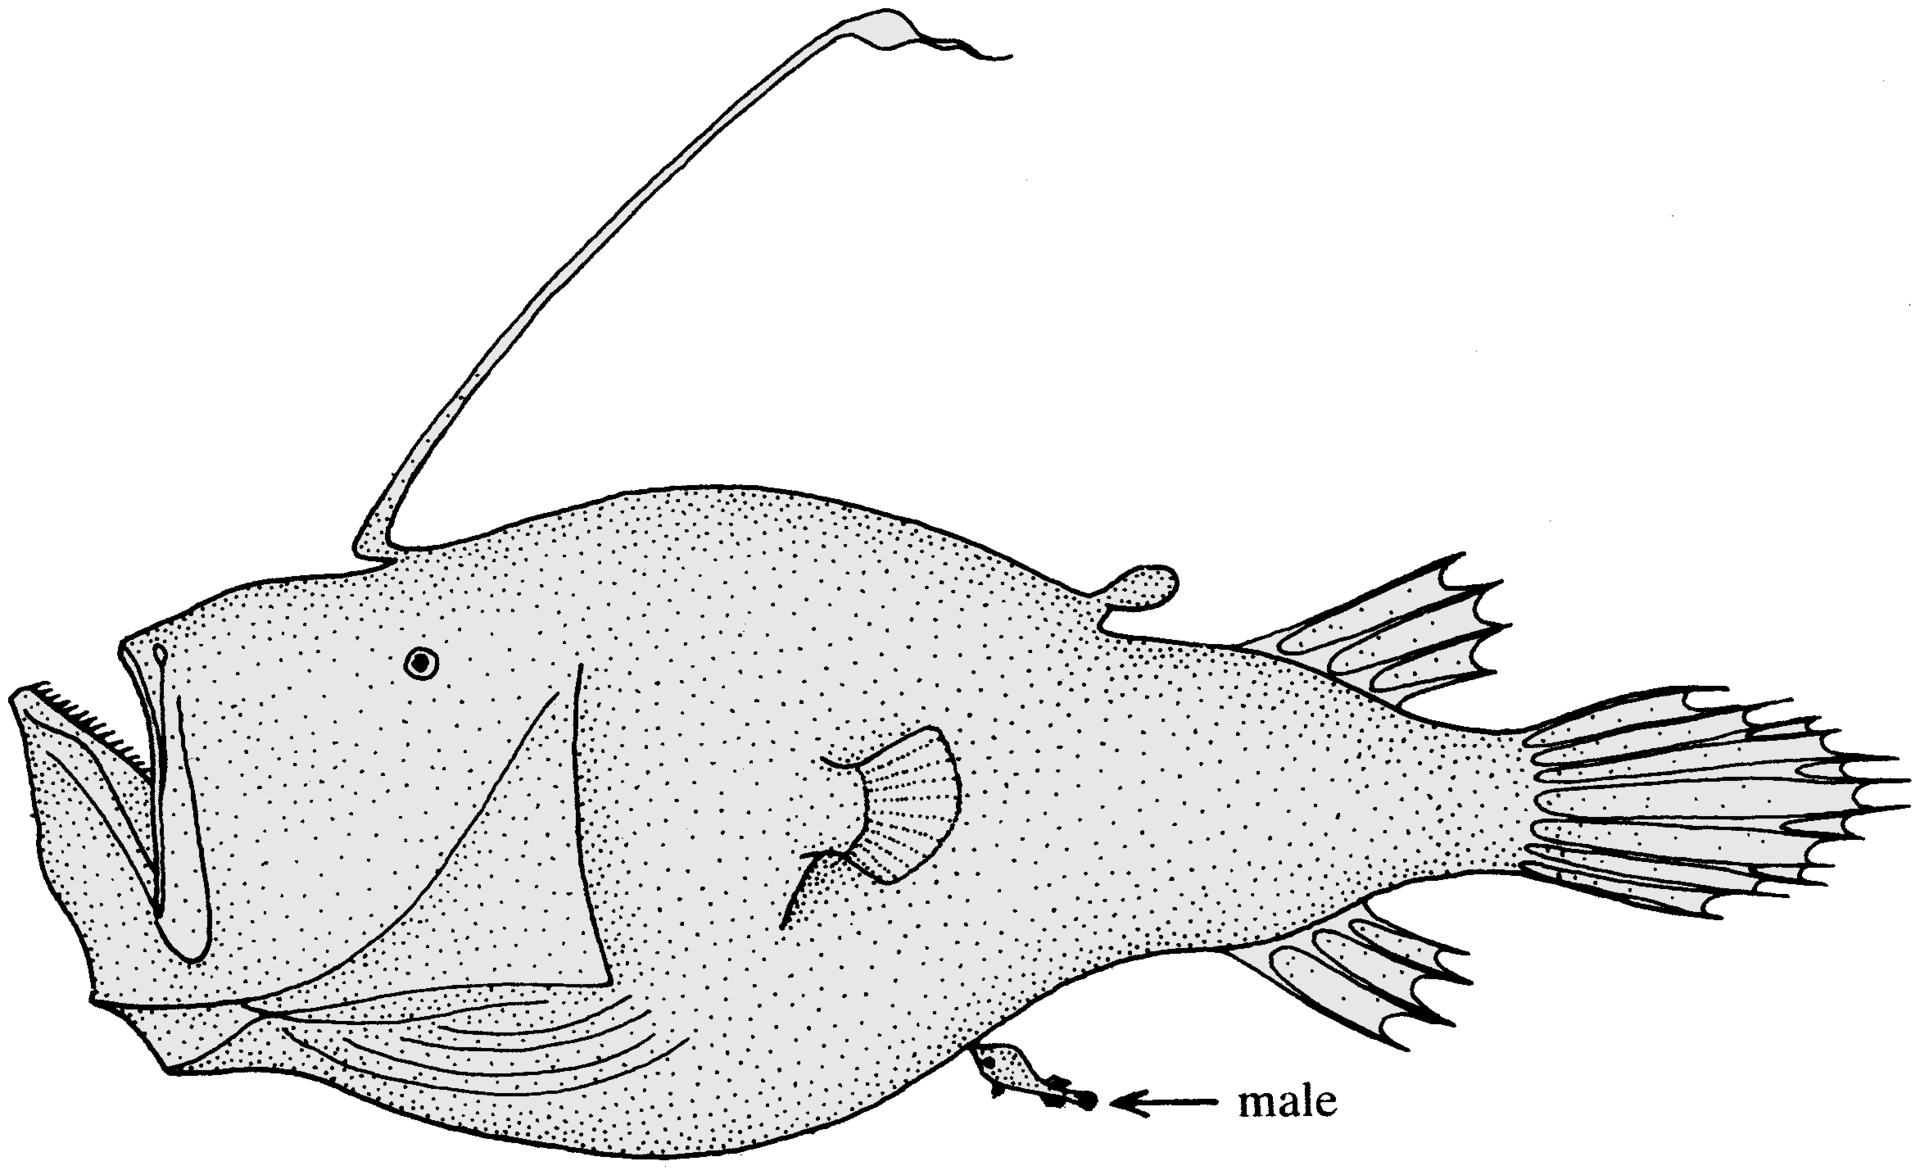 Angler fish take sexual dimorphism to the extreme. (Tony Ayling/Wikipedia/CC BY-SA 1.0)